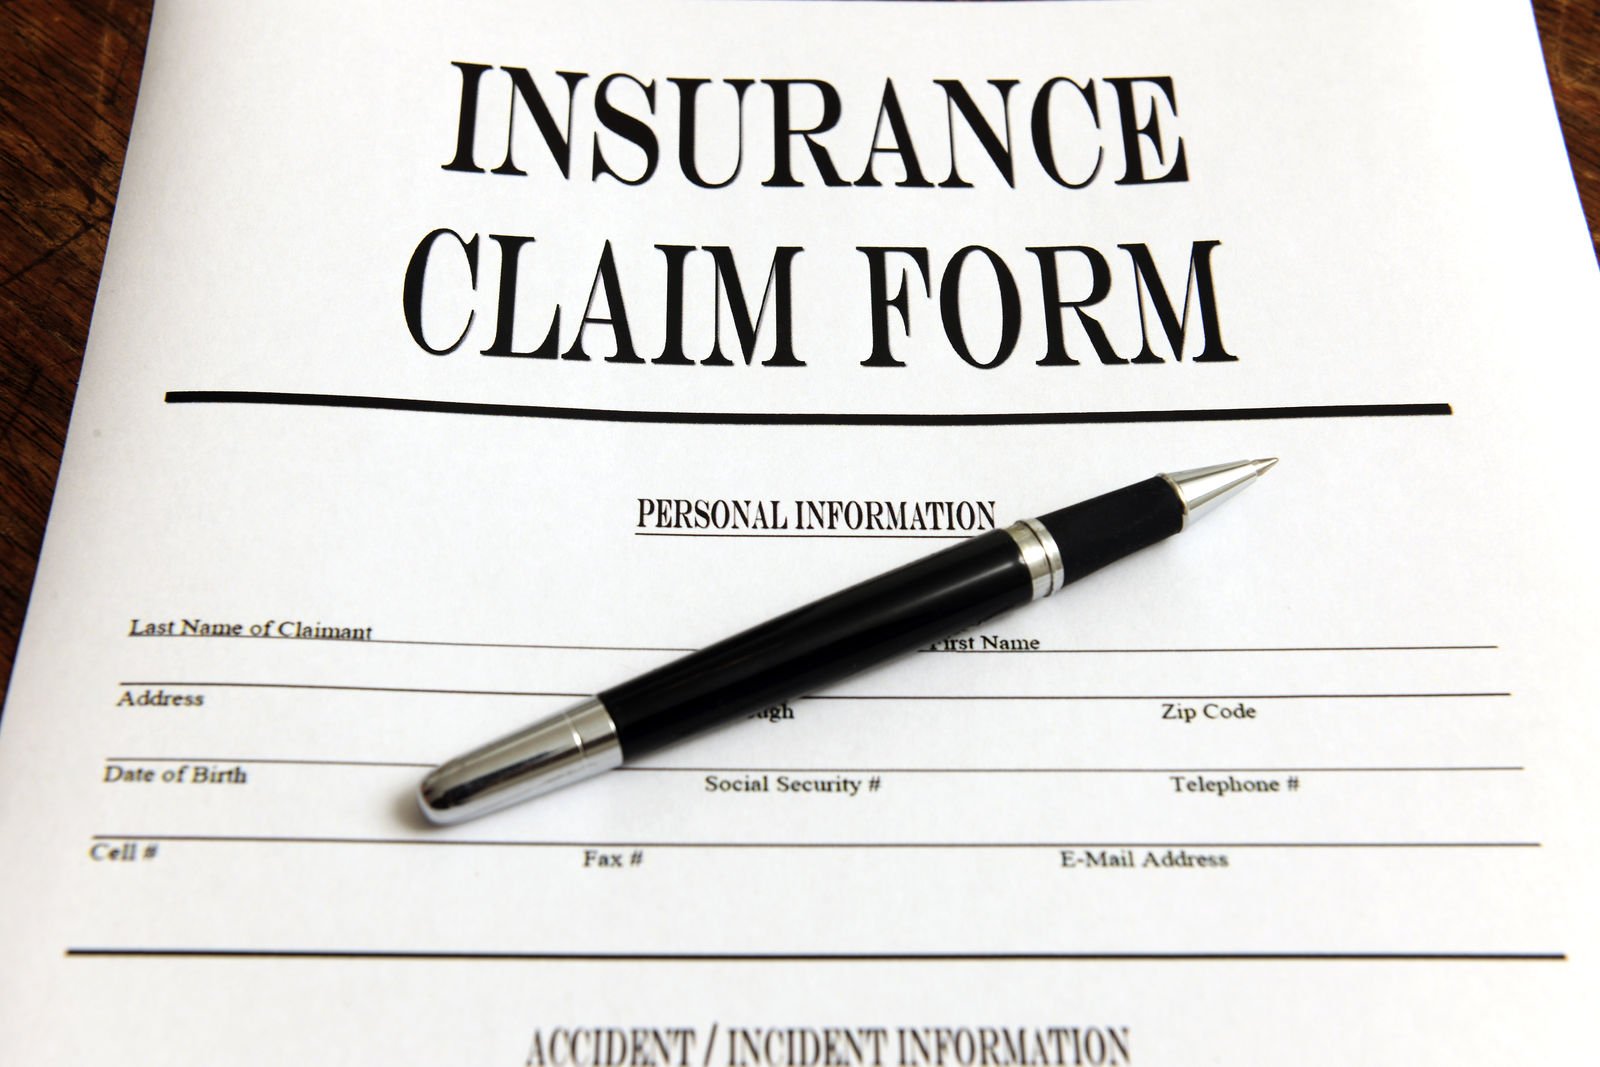 How long does it take for a car insurance claim to settle?